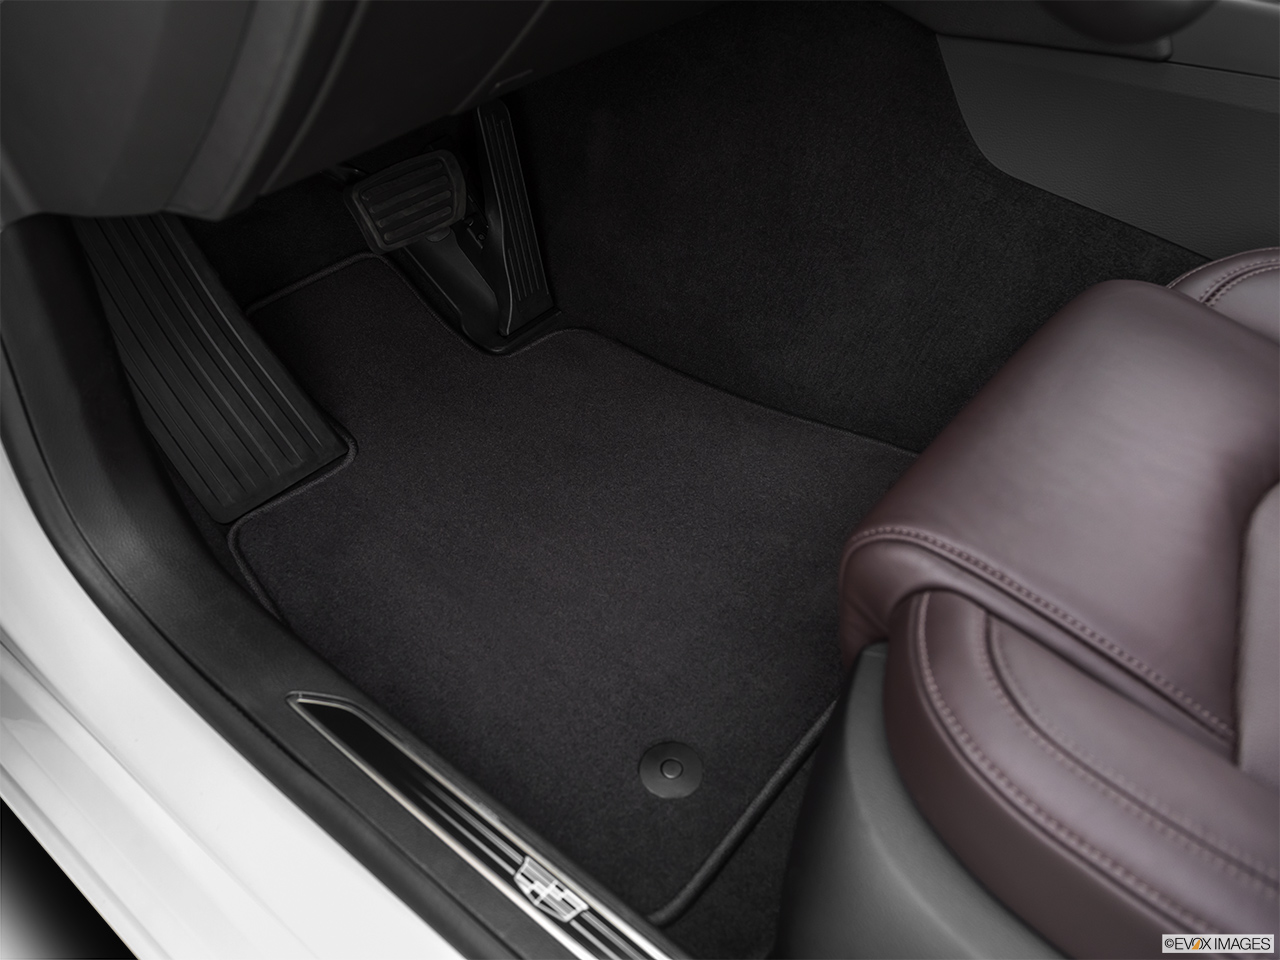 2019 Cadillac CT6-V Base Driver's floor mat and pedals. Mid-seat level from outside looking in. 